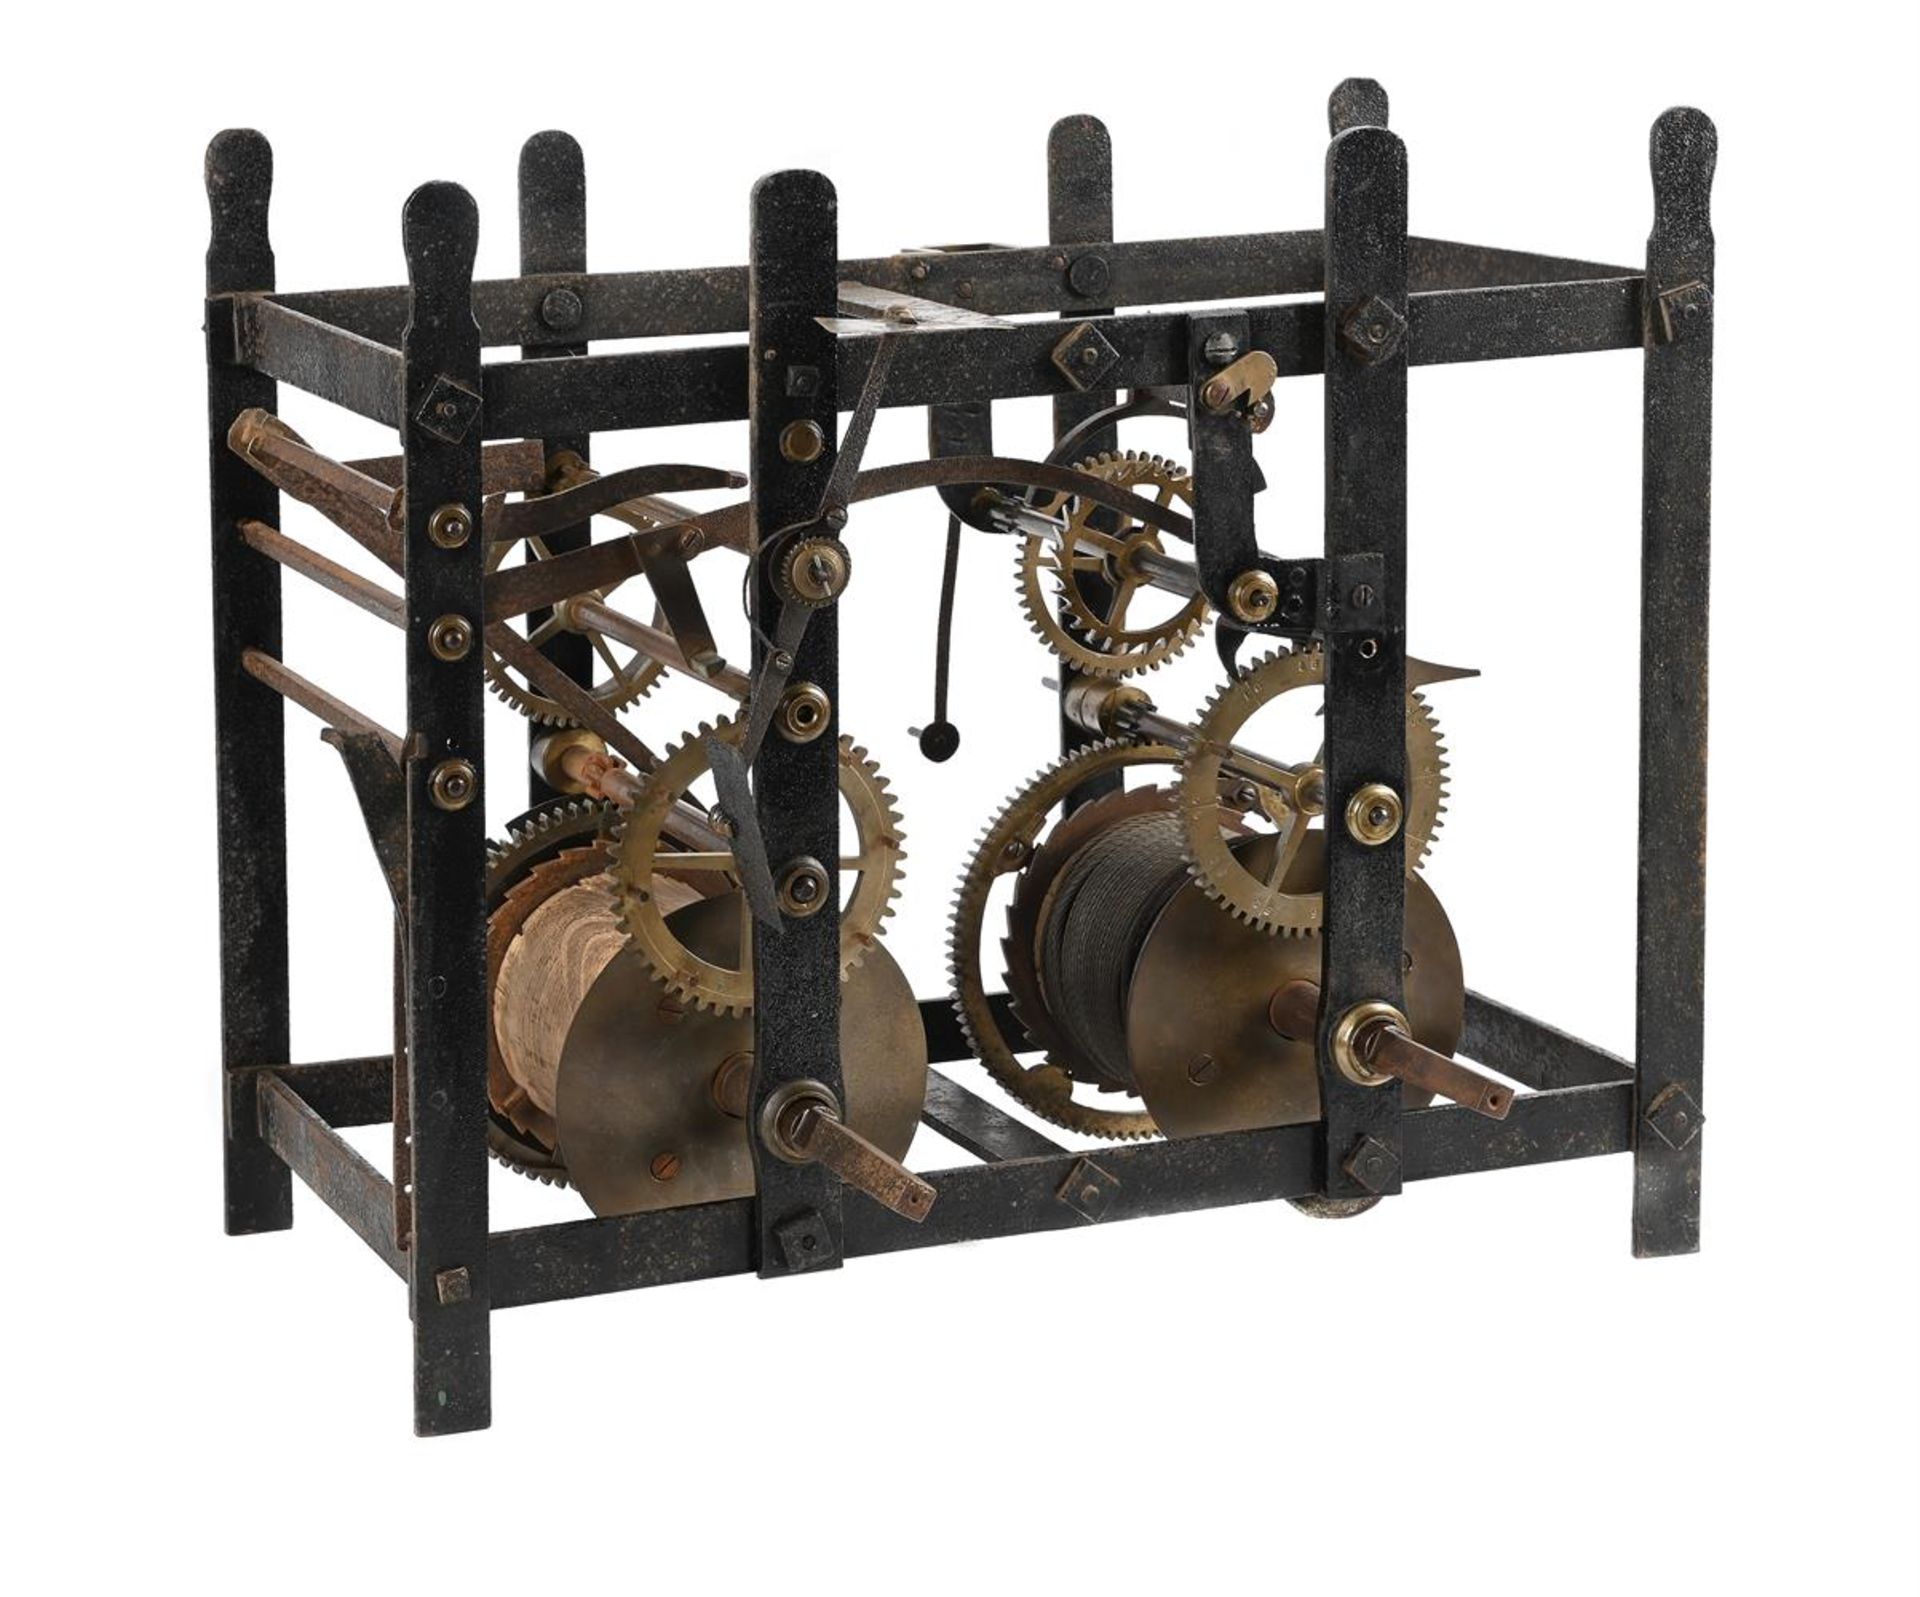 AN ENGLISH WROUGHT IRON AND BRASS TURRET CLOCK MOVEMENT TOGETHER WITH AN EARLIER ‘SETTING DIAL’